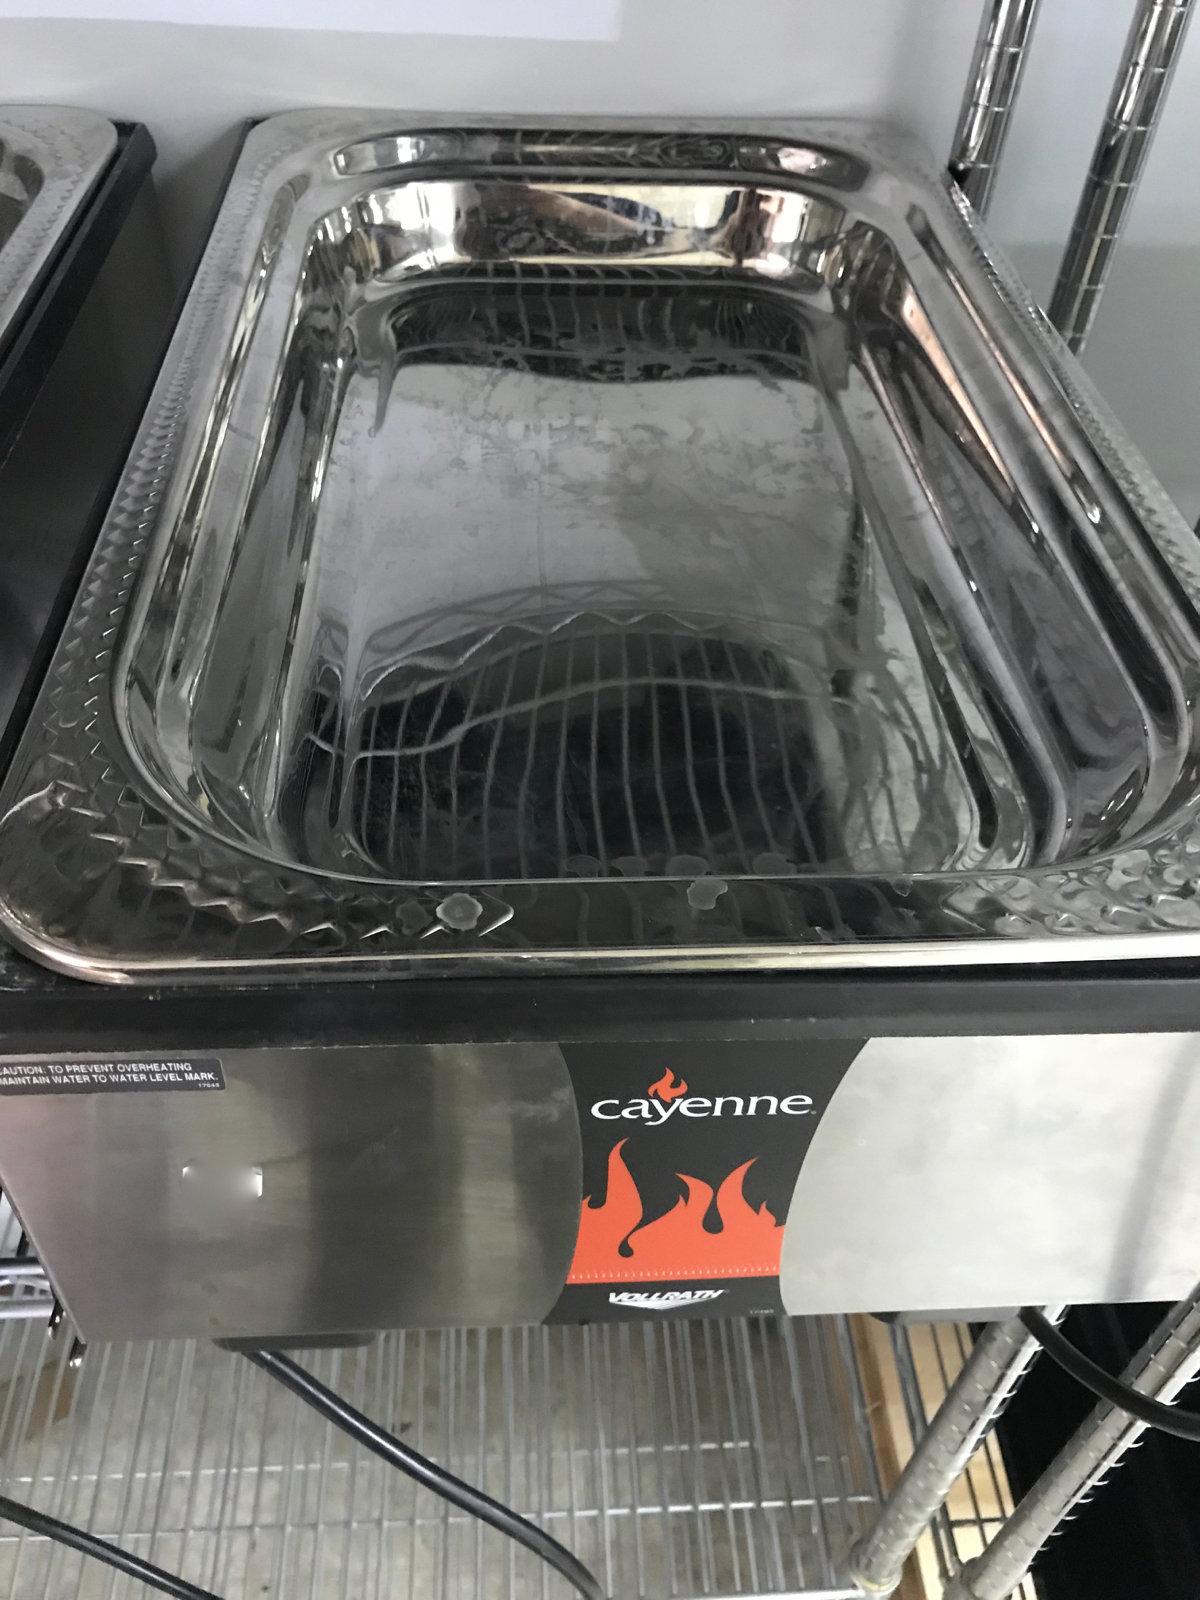 Cayenne Vollrath Model 1001 table top steamer, comes with pan.